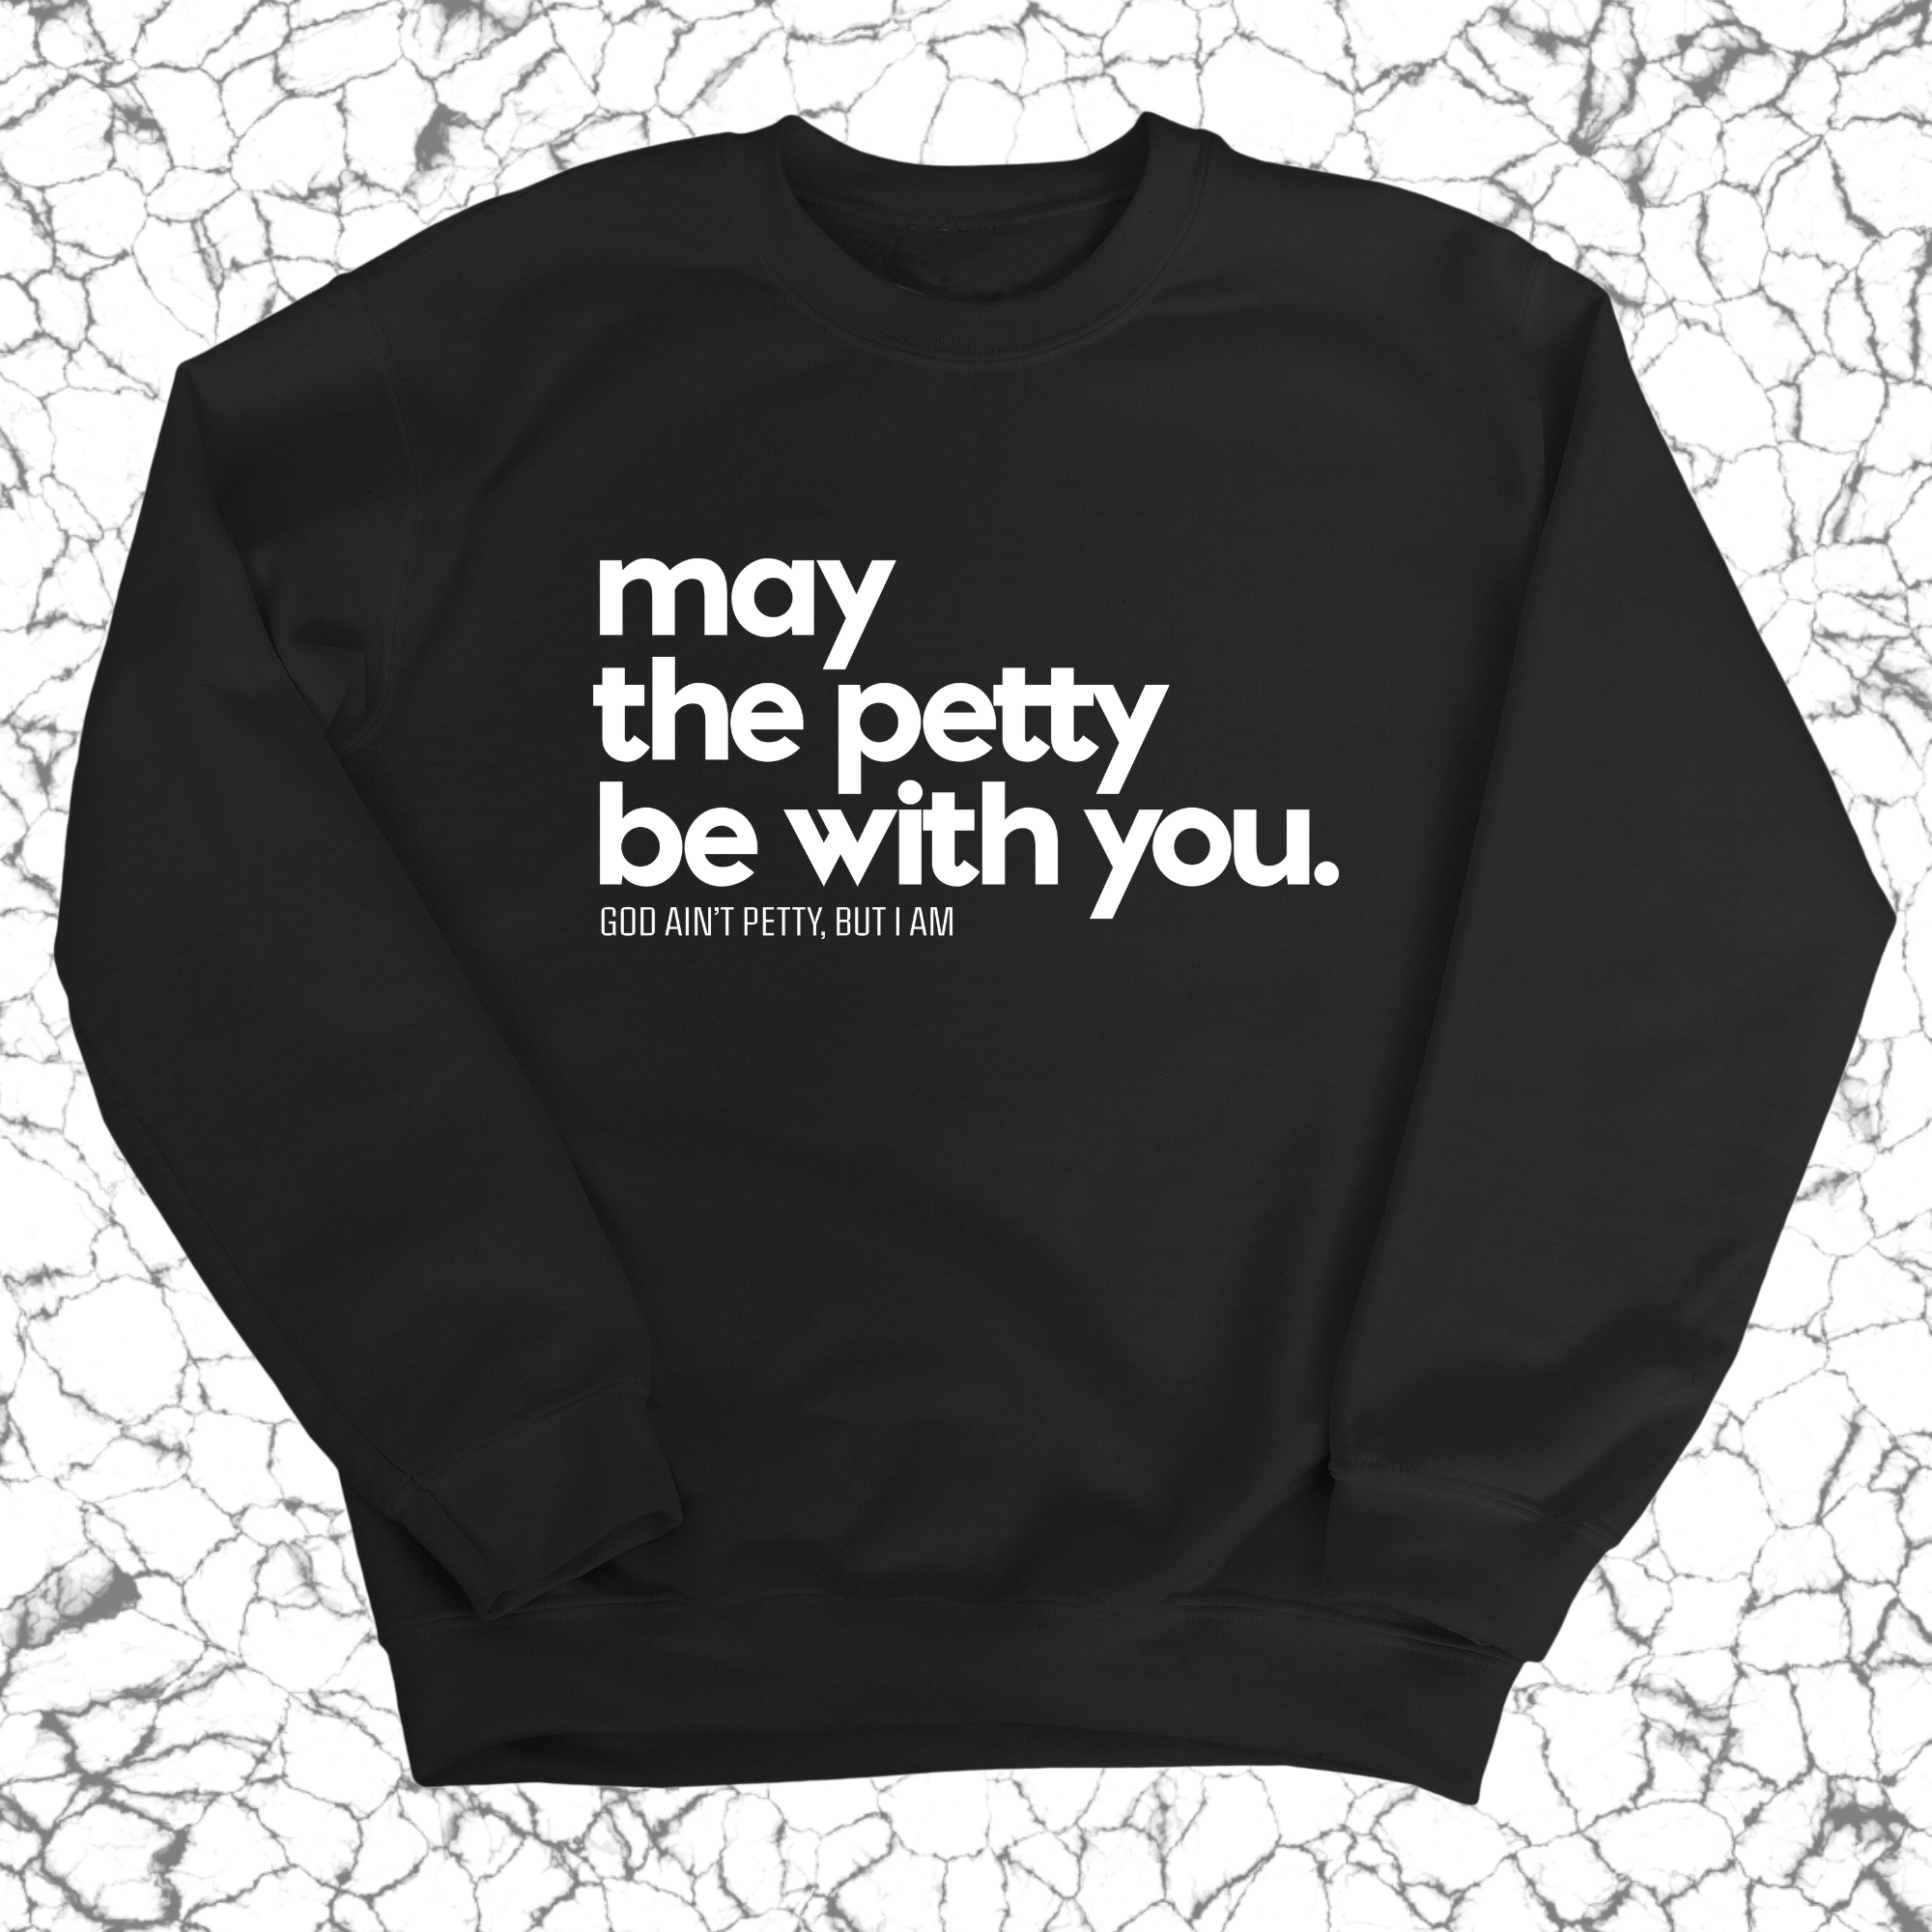 May the petty be with you Unisex Sweatshirt-Sweatshirt-The Original God Ain't Petty But I Am